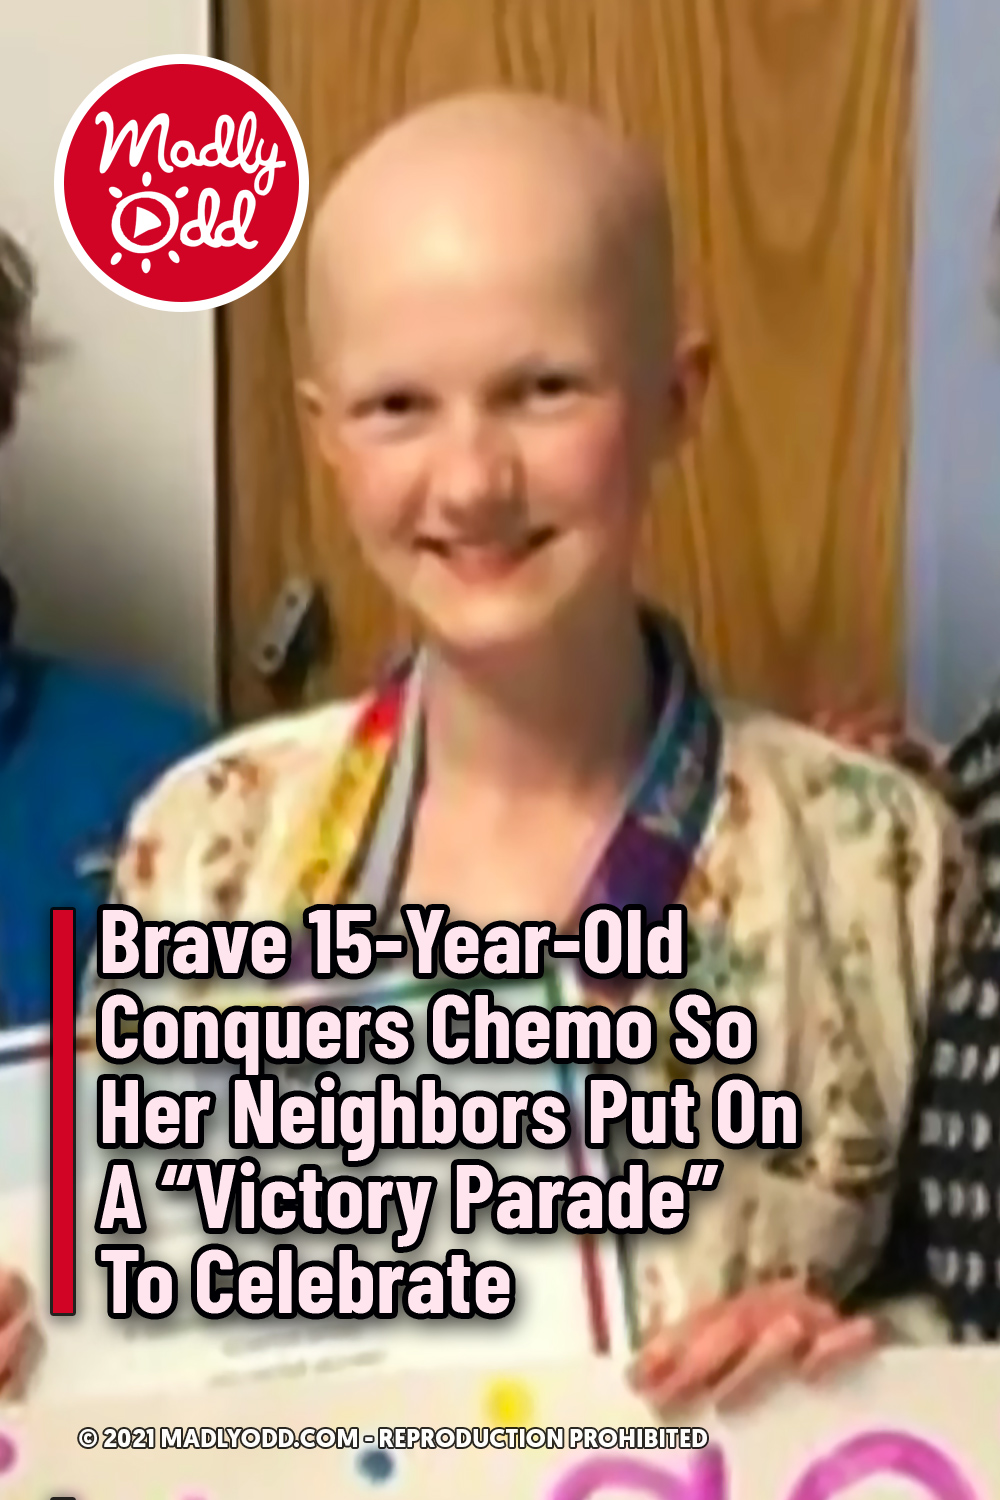 Brave 15-Year-Old Conquers Chemo So Her Neighbors Put On A “Victory Parade” To Celebrate